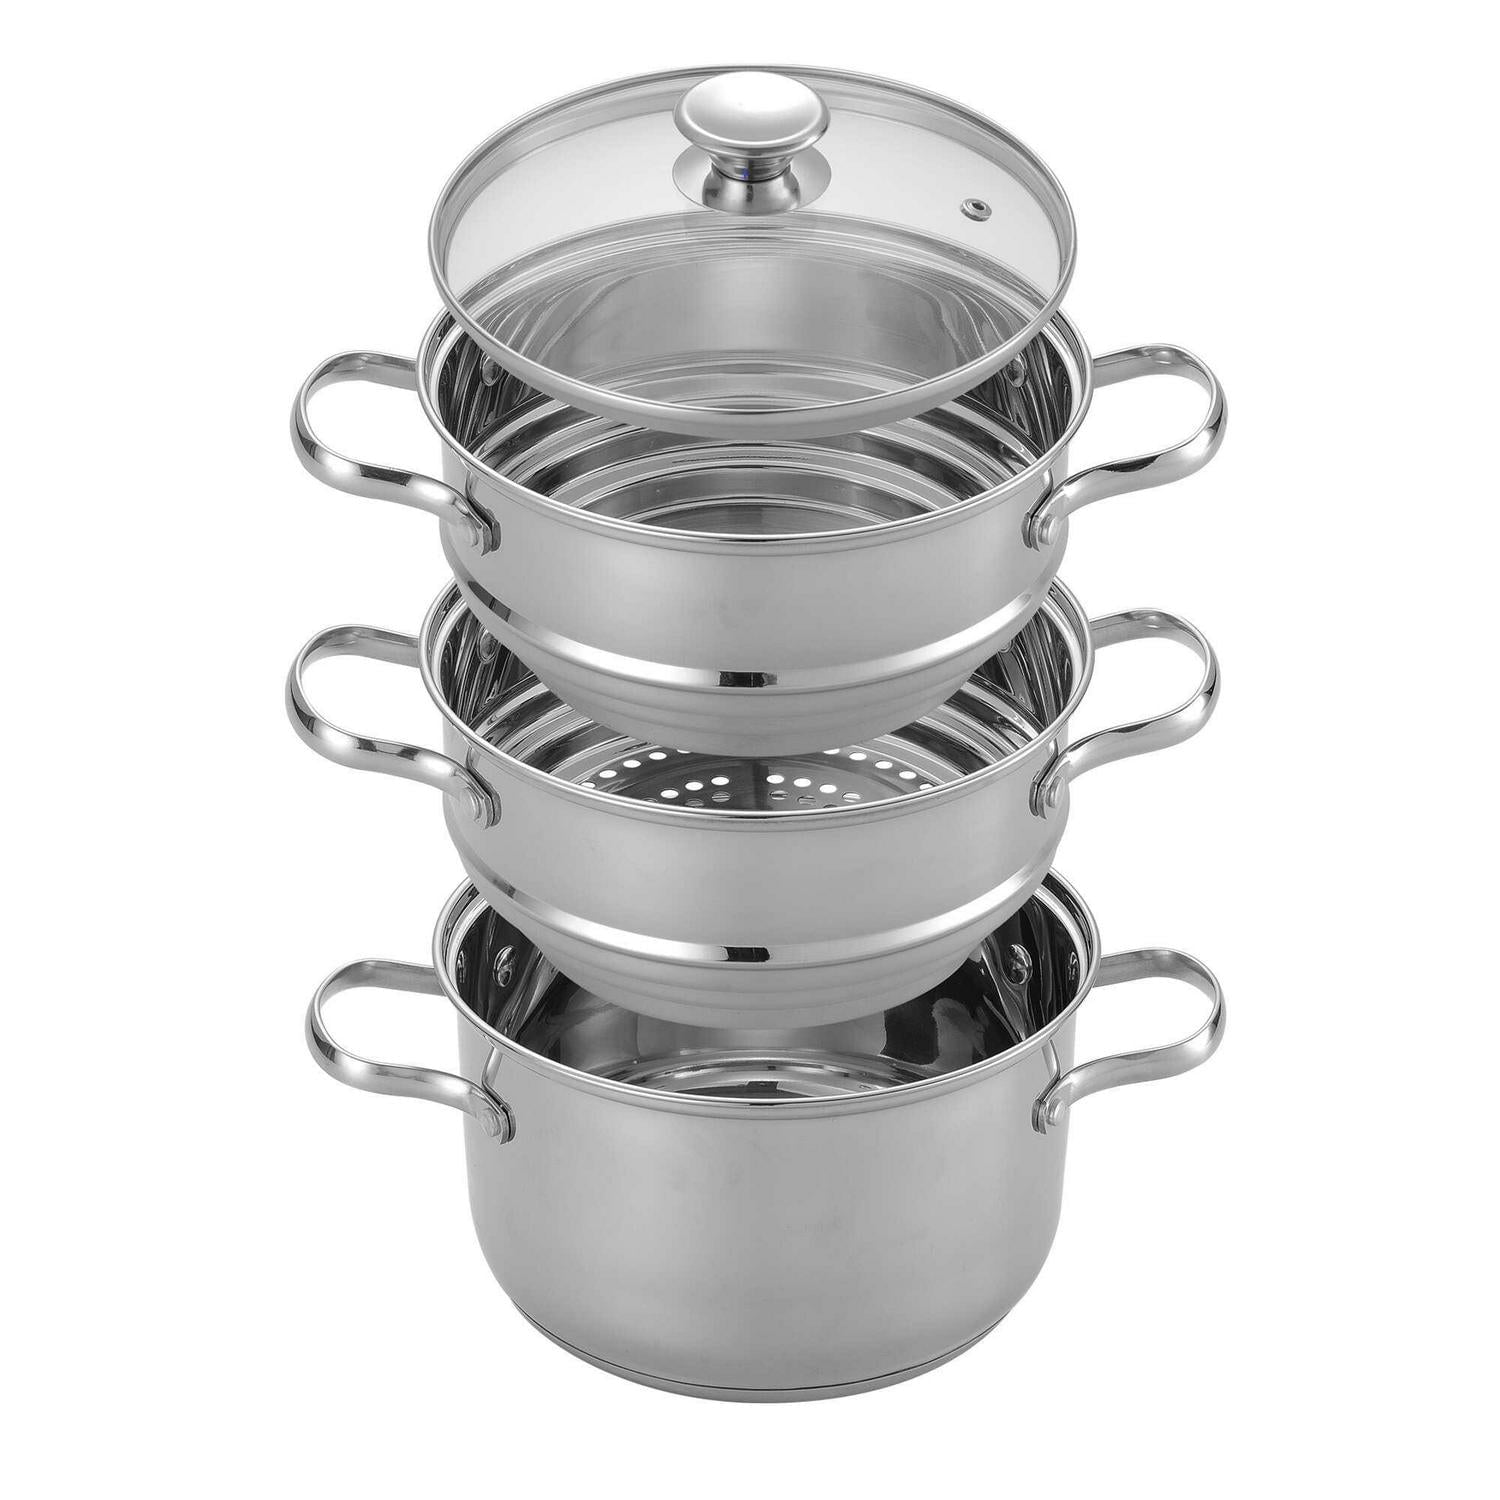 Stainless Steel Double Boiler and Steamer Set Cook N Home NC-00313 4QT 20CM 